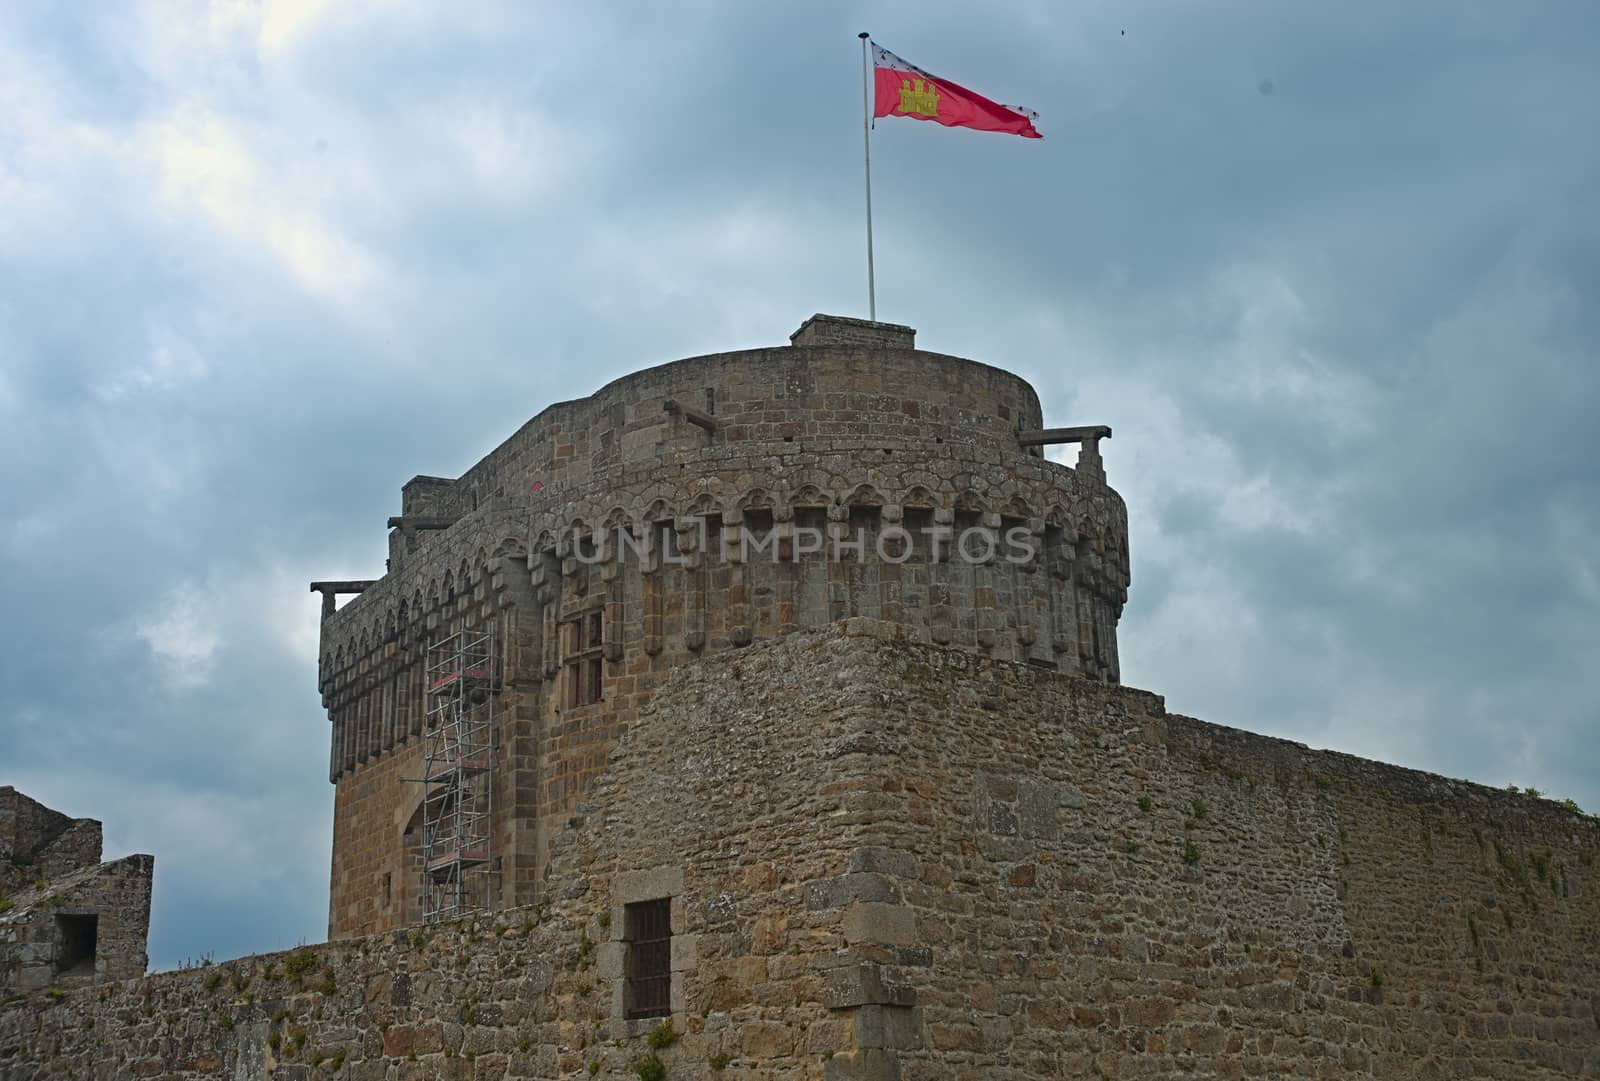 Big central stone tower with flag on top at Dinan fortress, France by sheriffkule